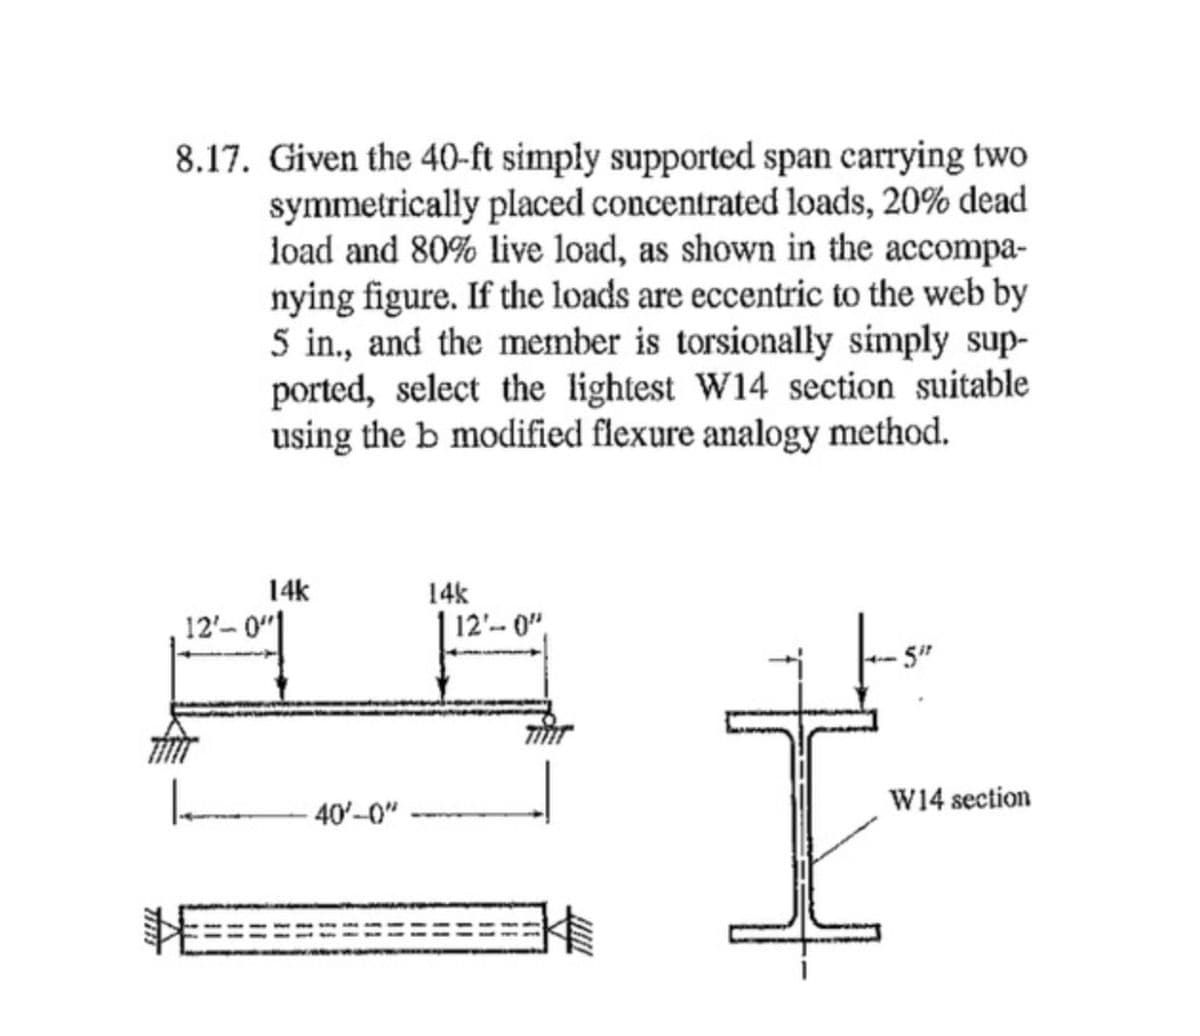 8.17. Given the 40-ft simply supported span carrying two
symmetrically placed concentrated loads, 20% dead
load and 80% live load, as shown in the accompa-
nying figure. If the loads are eccentric to the web by
5 in., and the member is torsionally simply sup-
ported, select the lightest W14 section suitable
using the b modified flexure analogy method.
14k
14k
12'-
12'-0"
-5"
40'-0"
W14 section